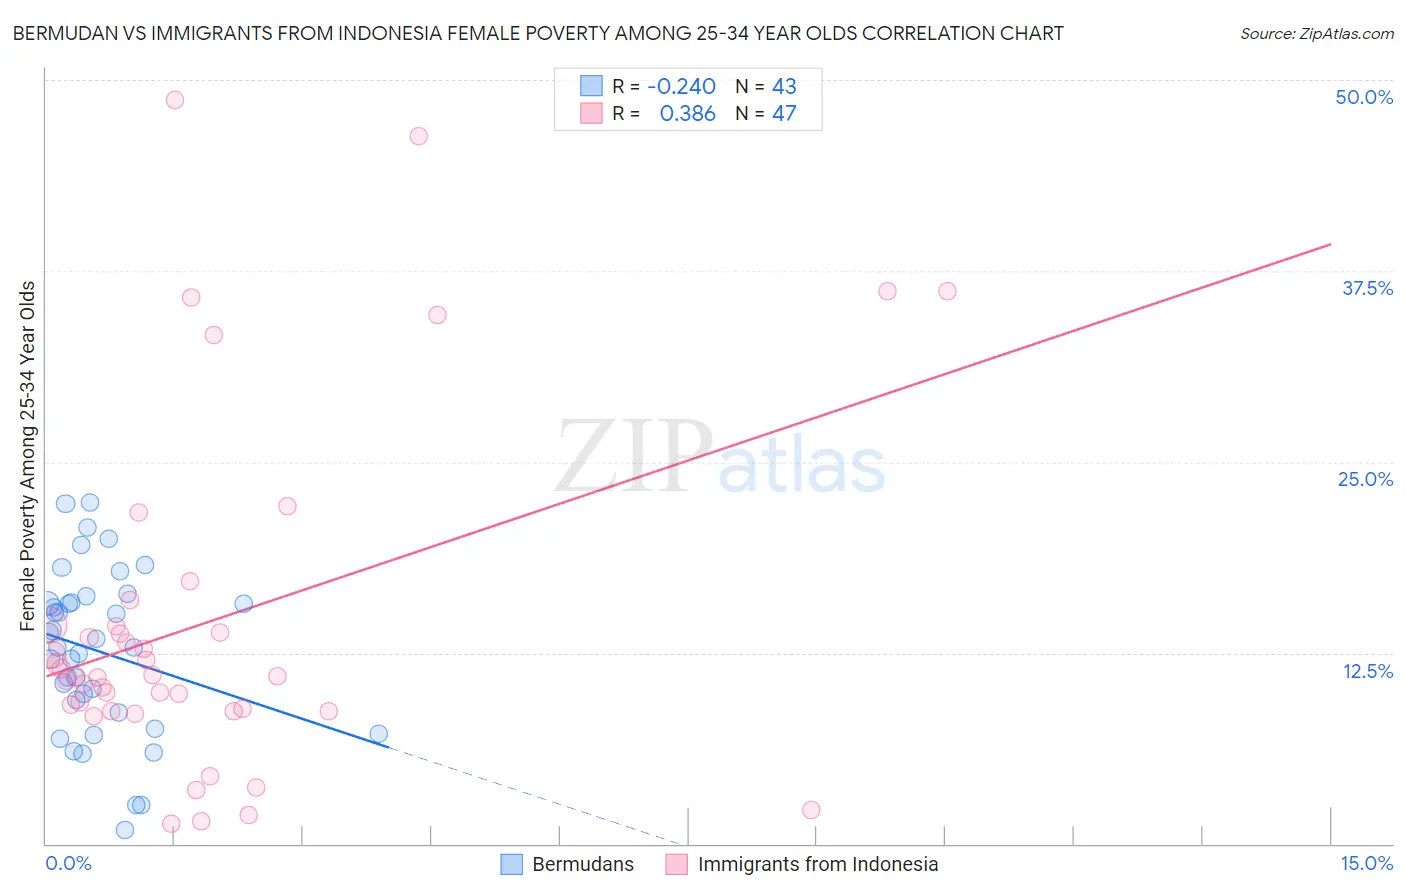 Bermudan vs Immigrants from Indonesia Female Poverty Among 25-34 Year Olds